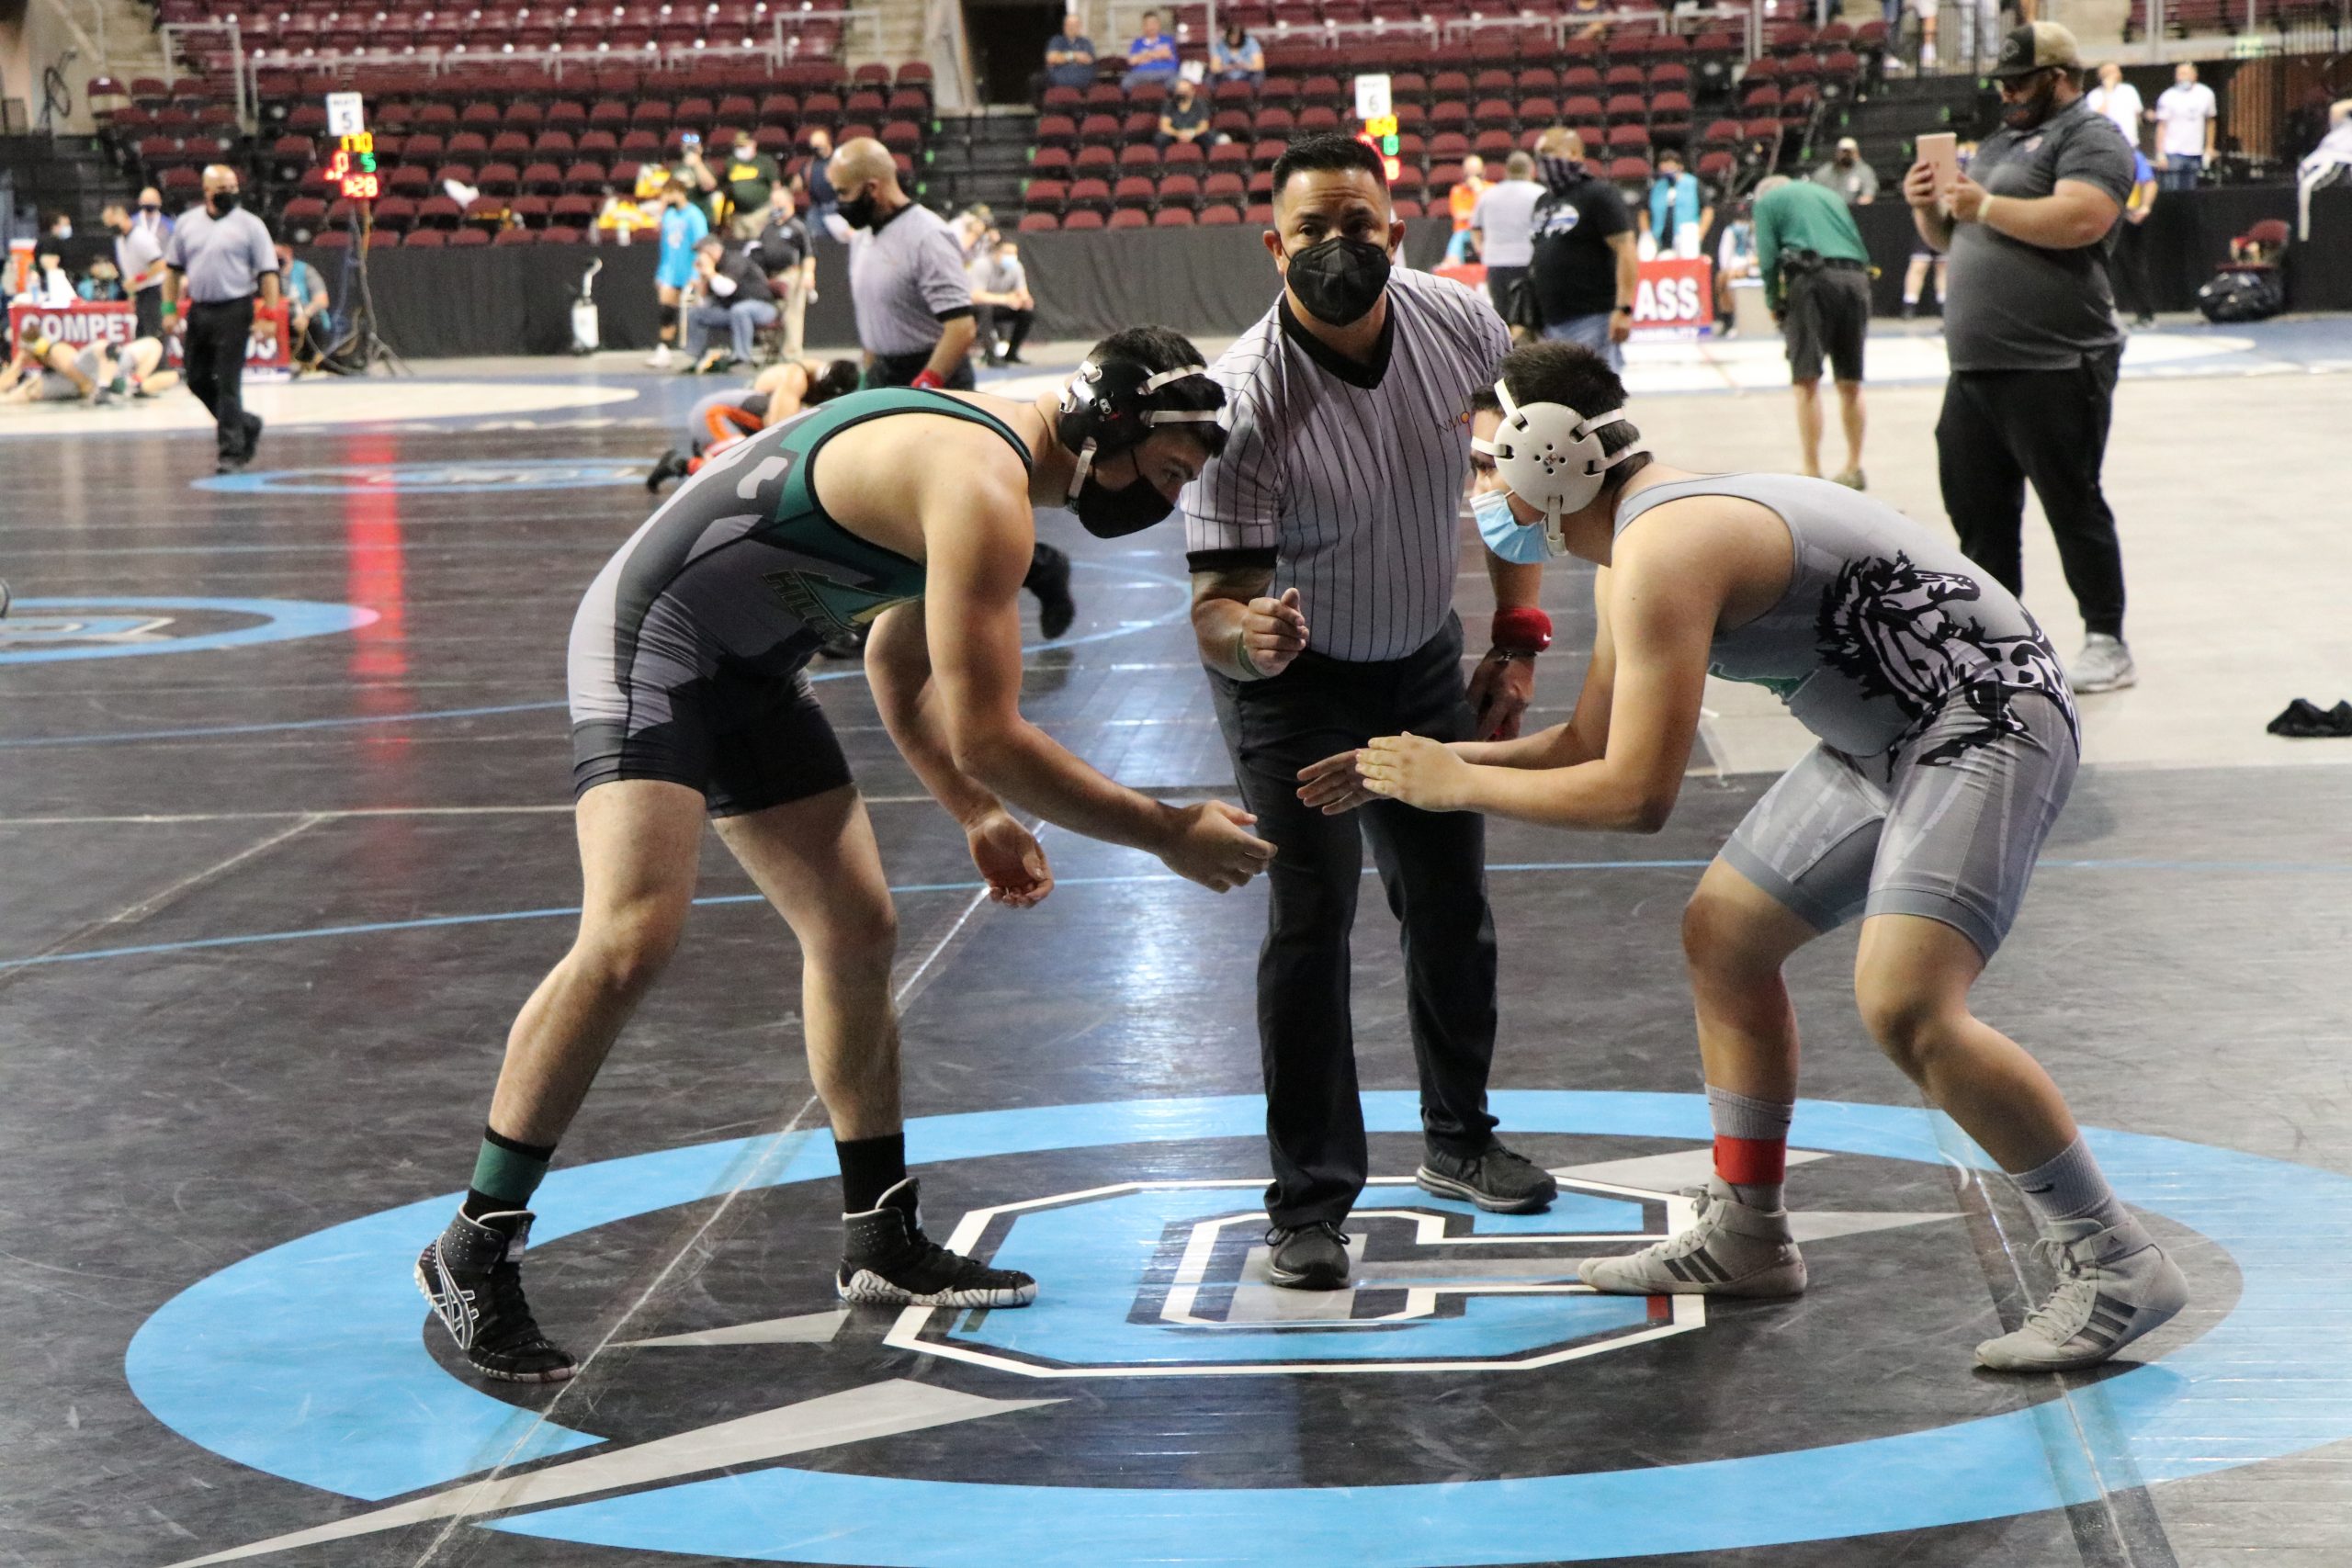 NEW MEXICO NATIONAL GUARD STATE WRESTLING CHAMPIONSHIP INFORMATION